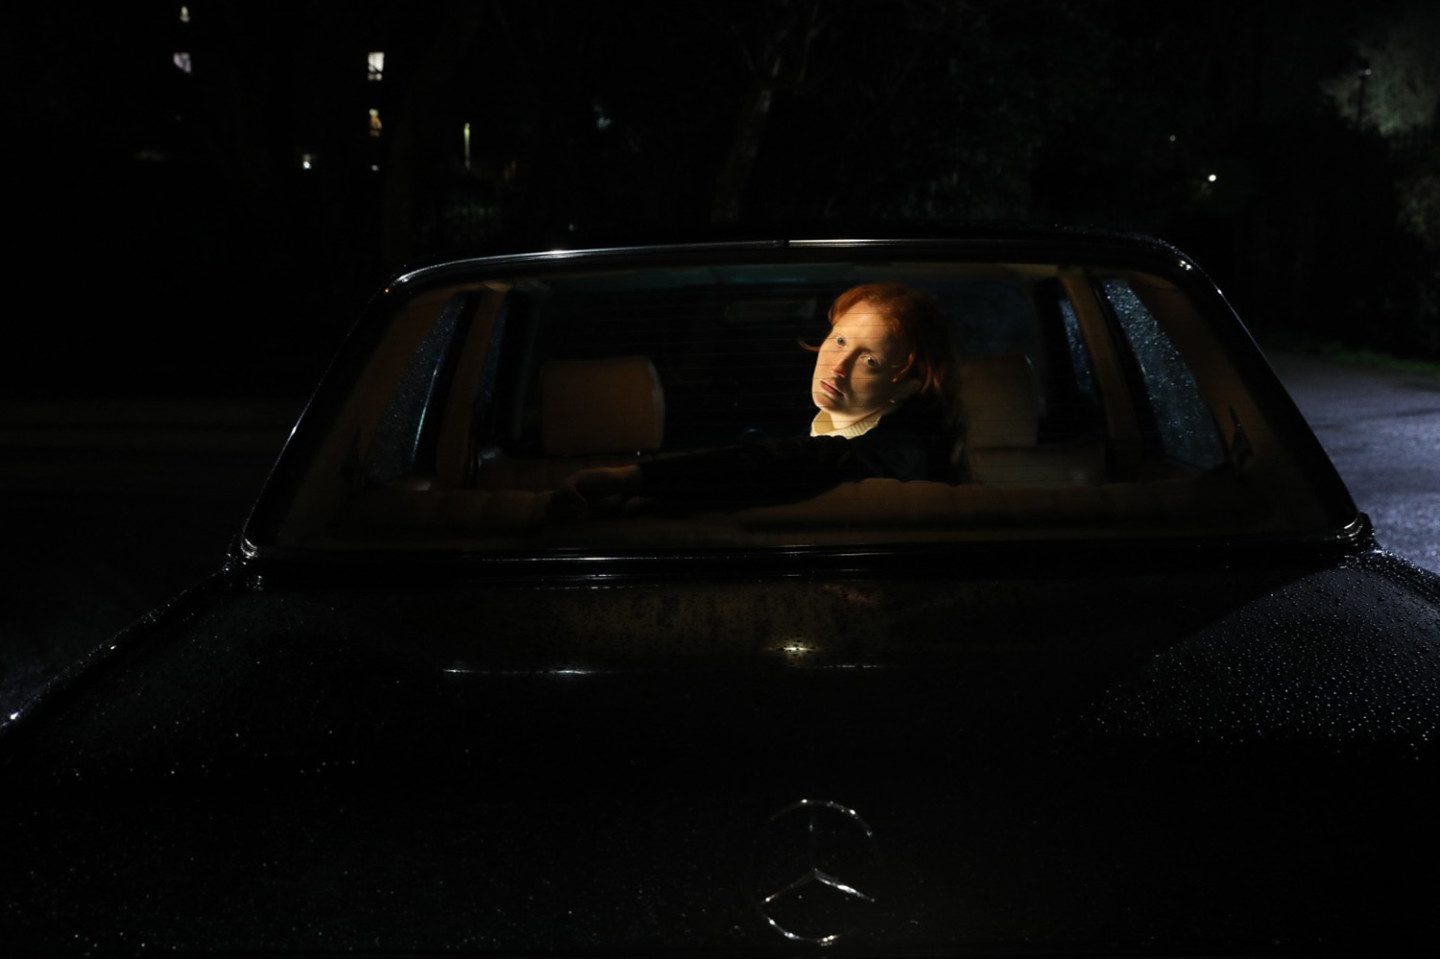 Film still from Bodily Remains, a person looking back thorugh a car window